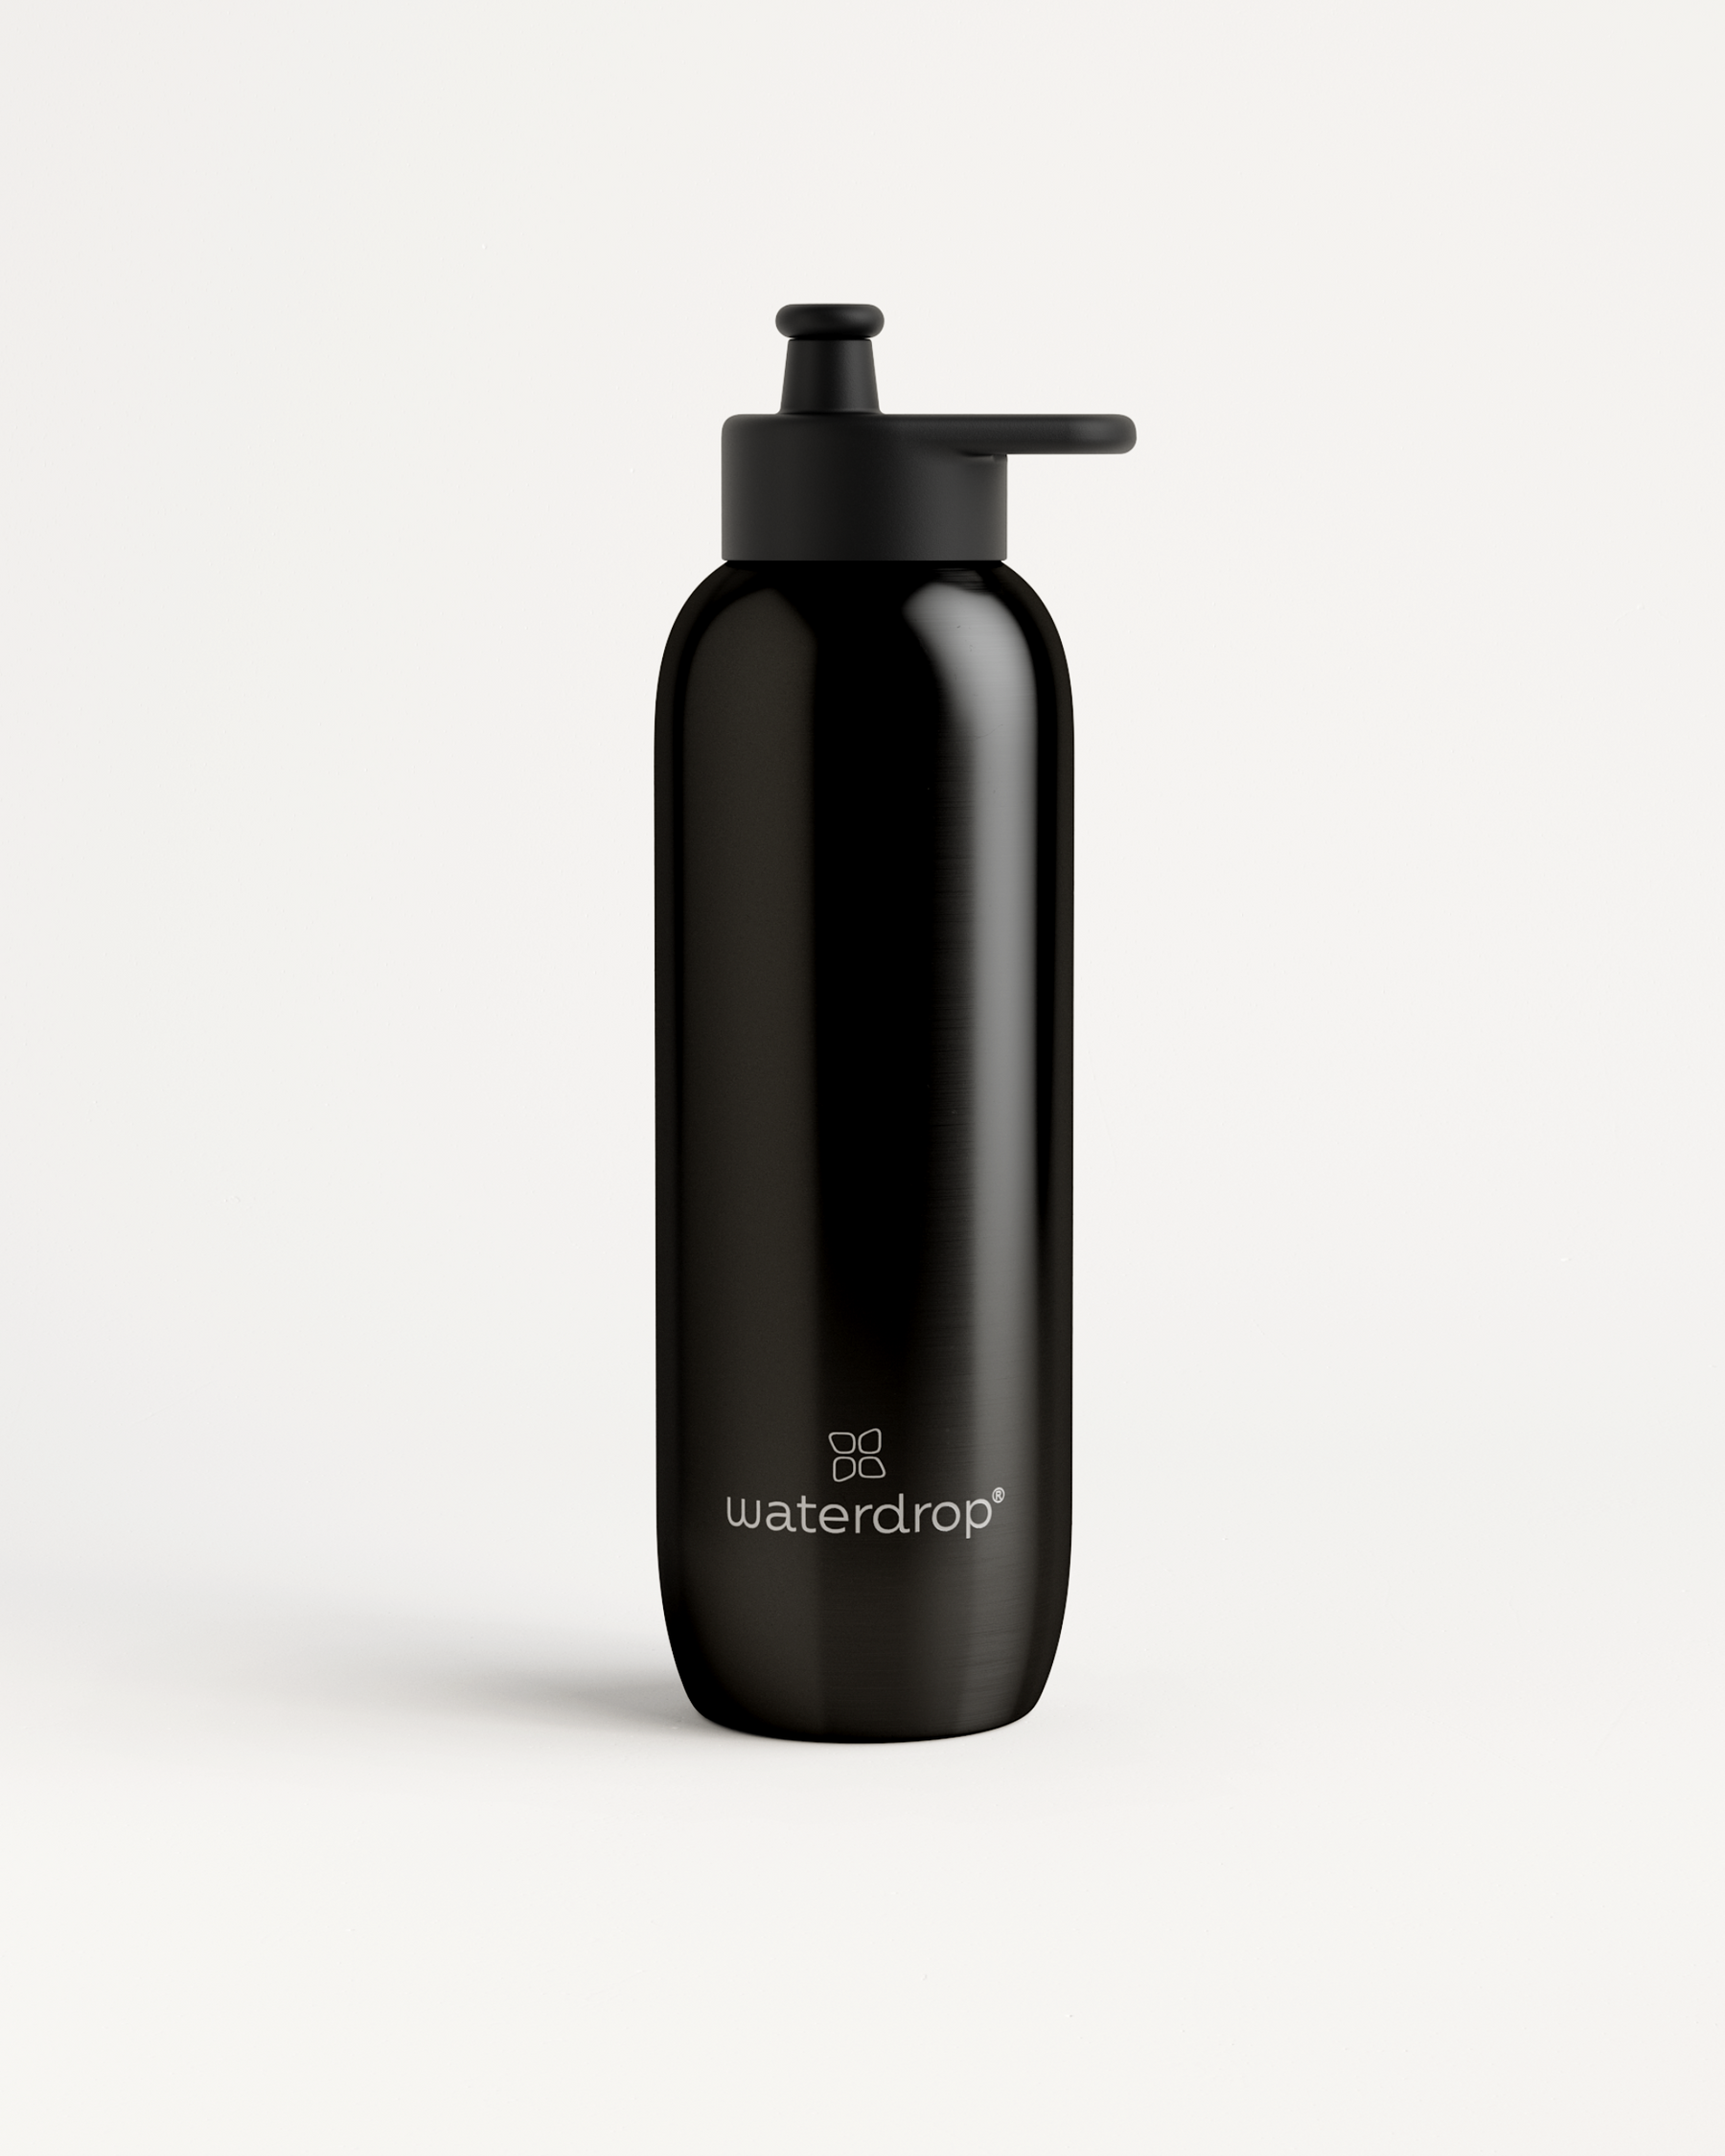 Custom Sports Bottle | For Trips, Hiking - 12 Colors